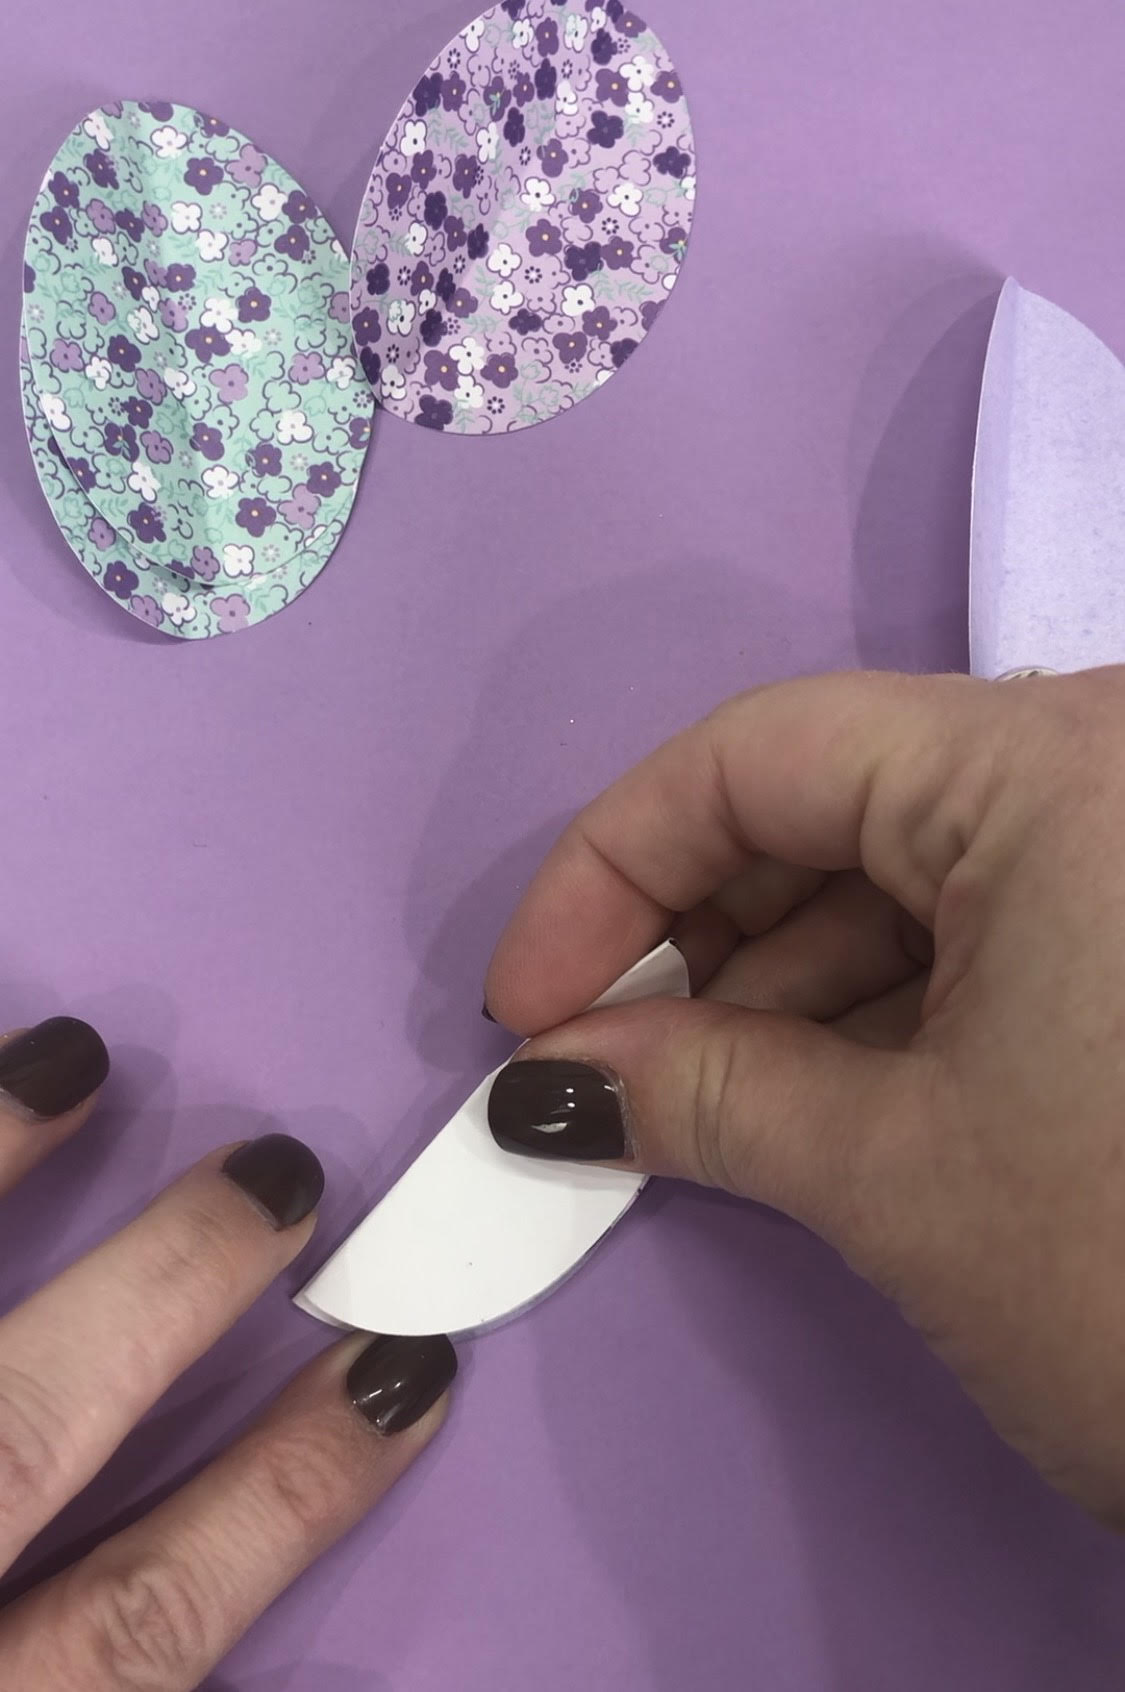 Image contains Amy's hands adhering a stack of folded egg shaped paper pieces together. It is on a purple background surrounded by egg shaped pieces of teal and purple patterned scrapbook paper.